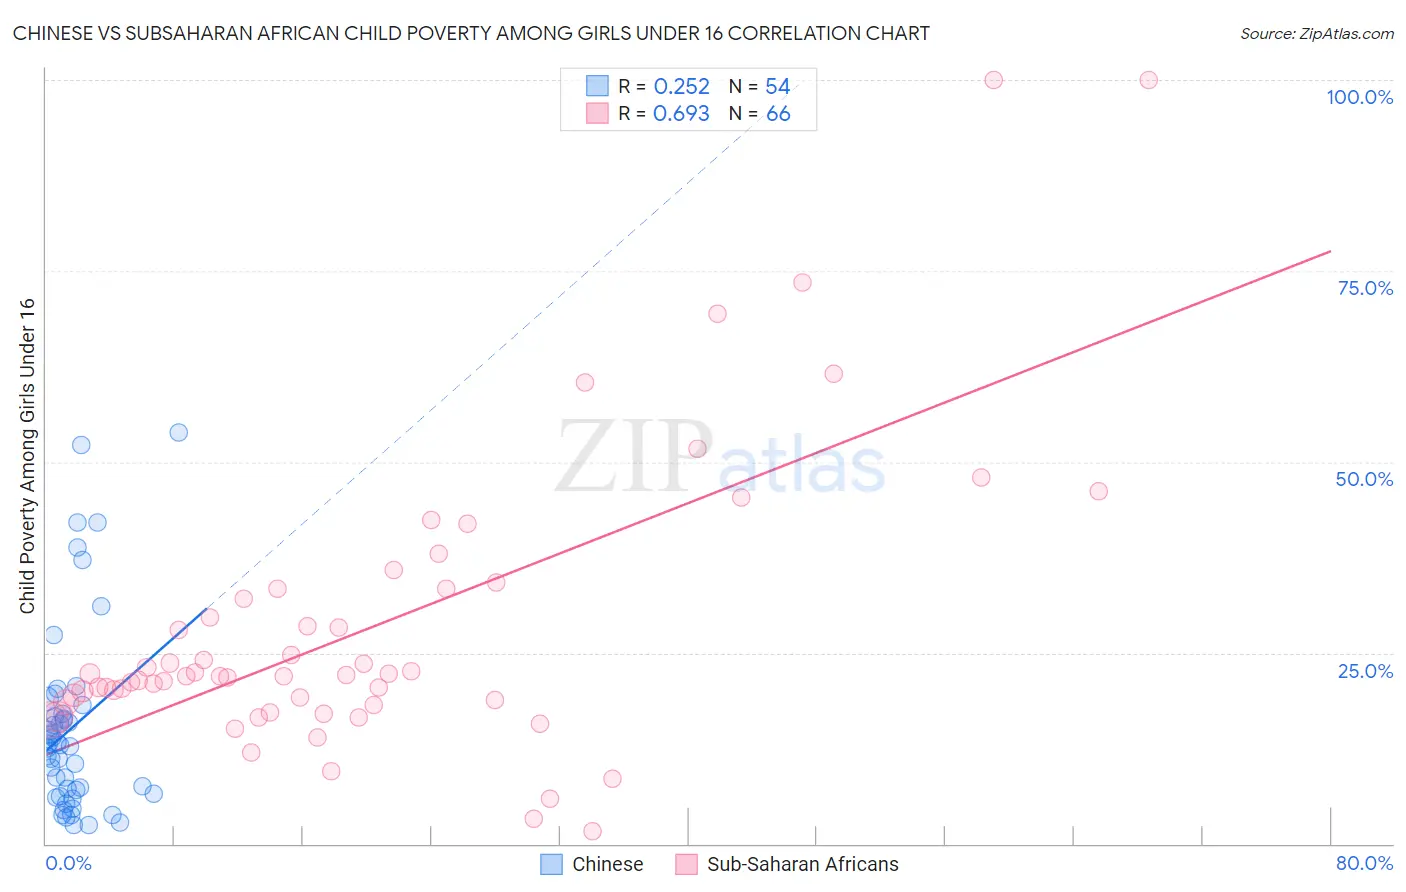 Chinese vs Subsaharan African Child Poverty Among Girls Under 16